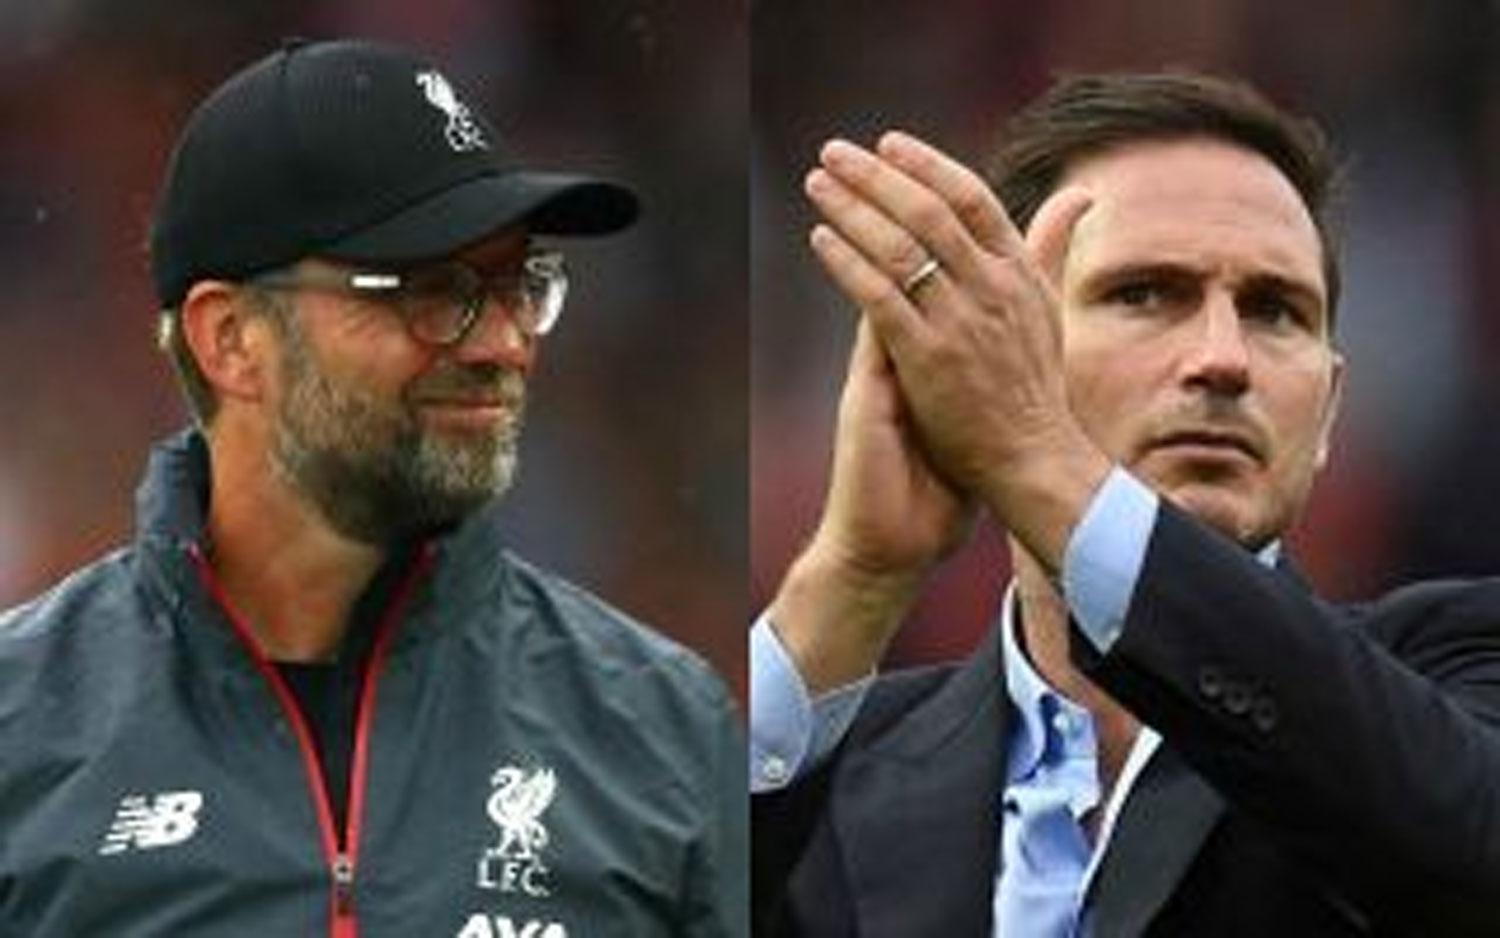 ‘We are not arrogant’ Klopp tells Lampard to move on